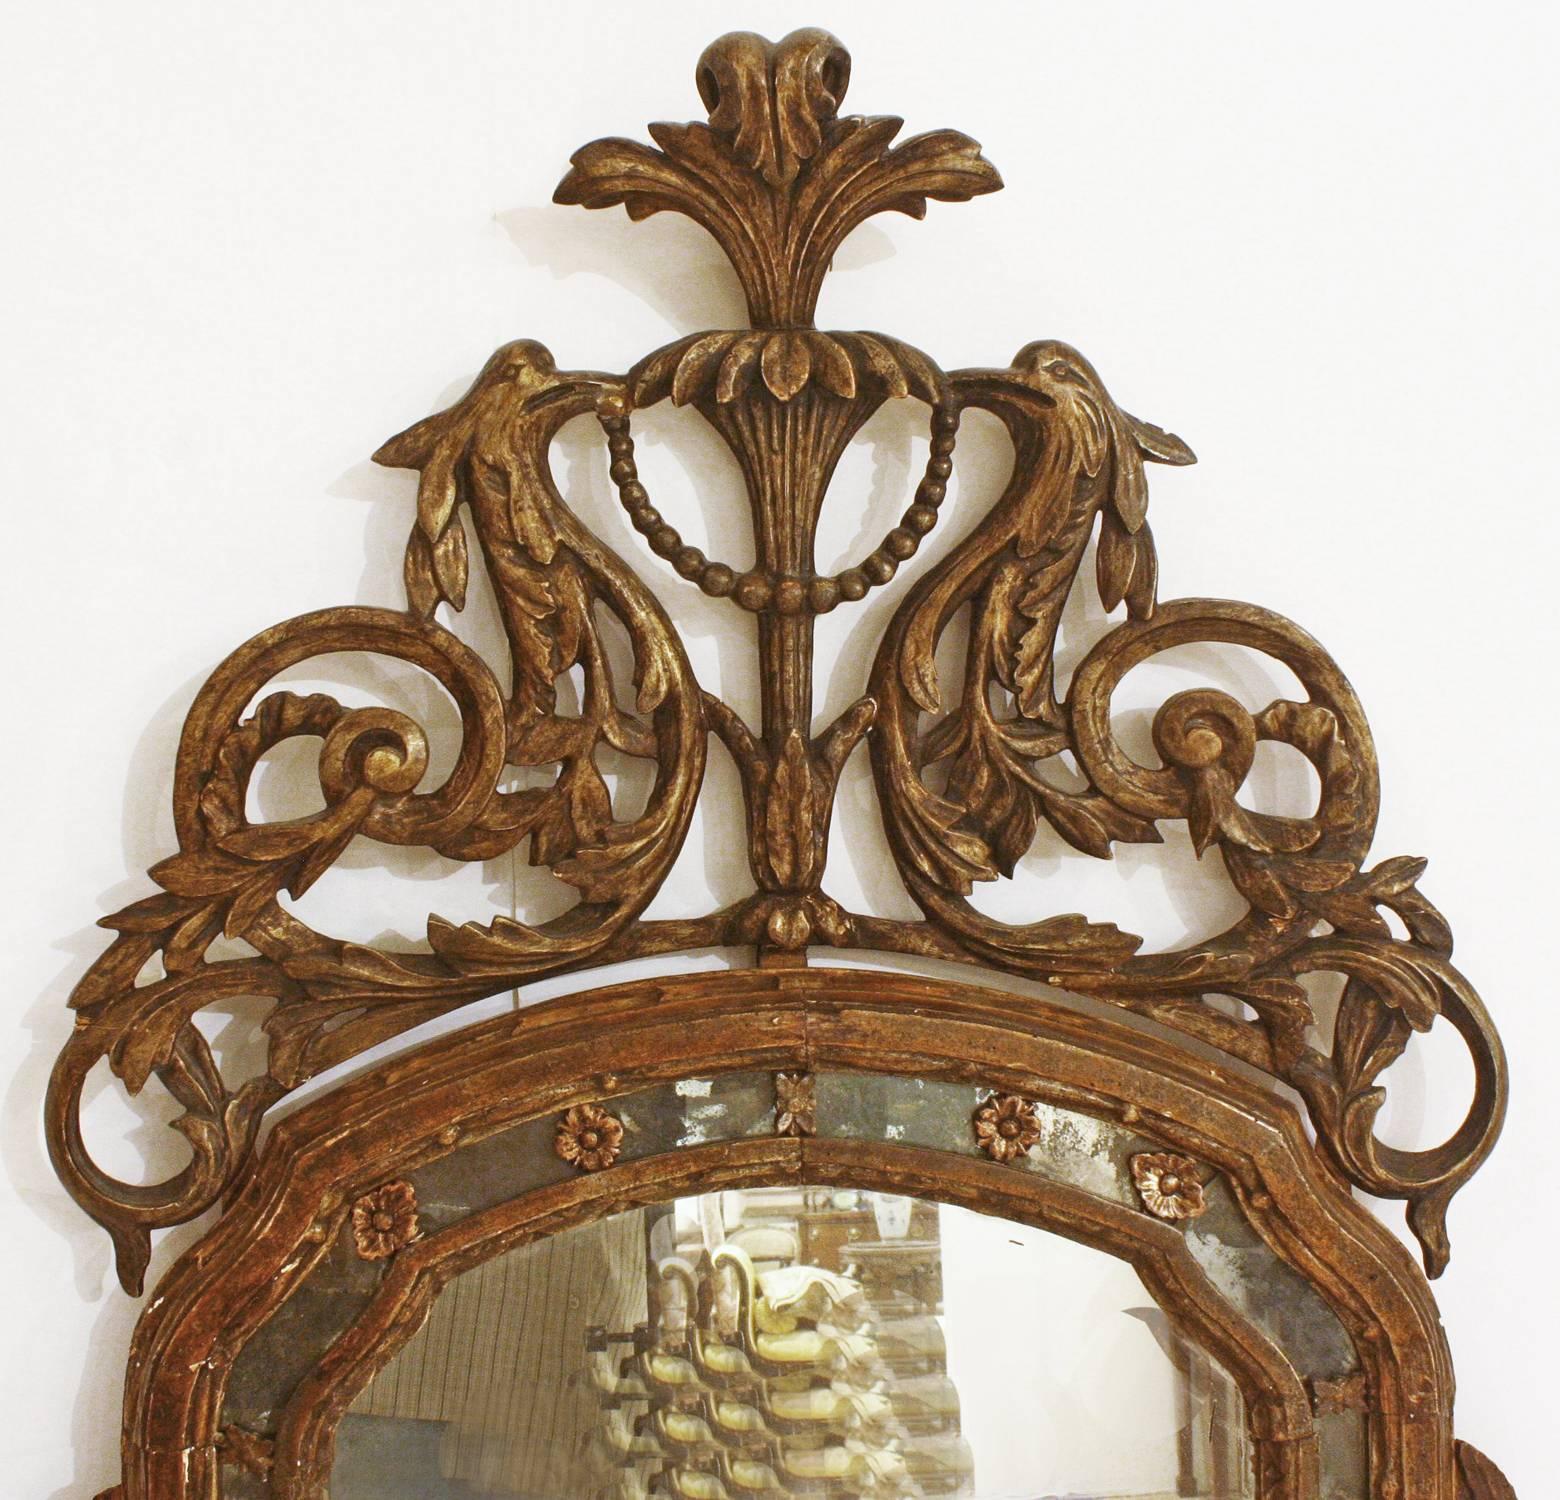 Carved and gilded 18th century Italian neoclassical pier mirror with mirrored border and carved open work top with bird's heads and leafy foliage including flowers, mirror frame bottom has cornucopia/horn shaped feet with swagged garland.